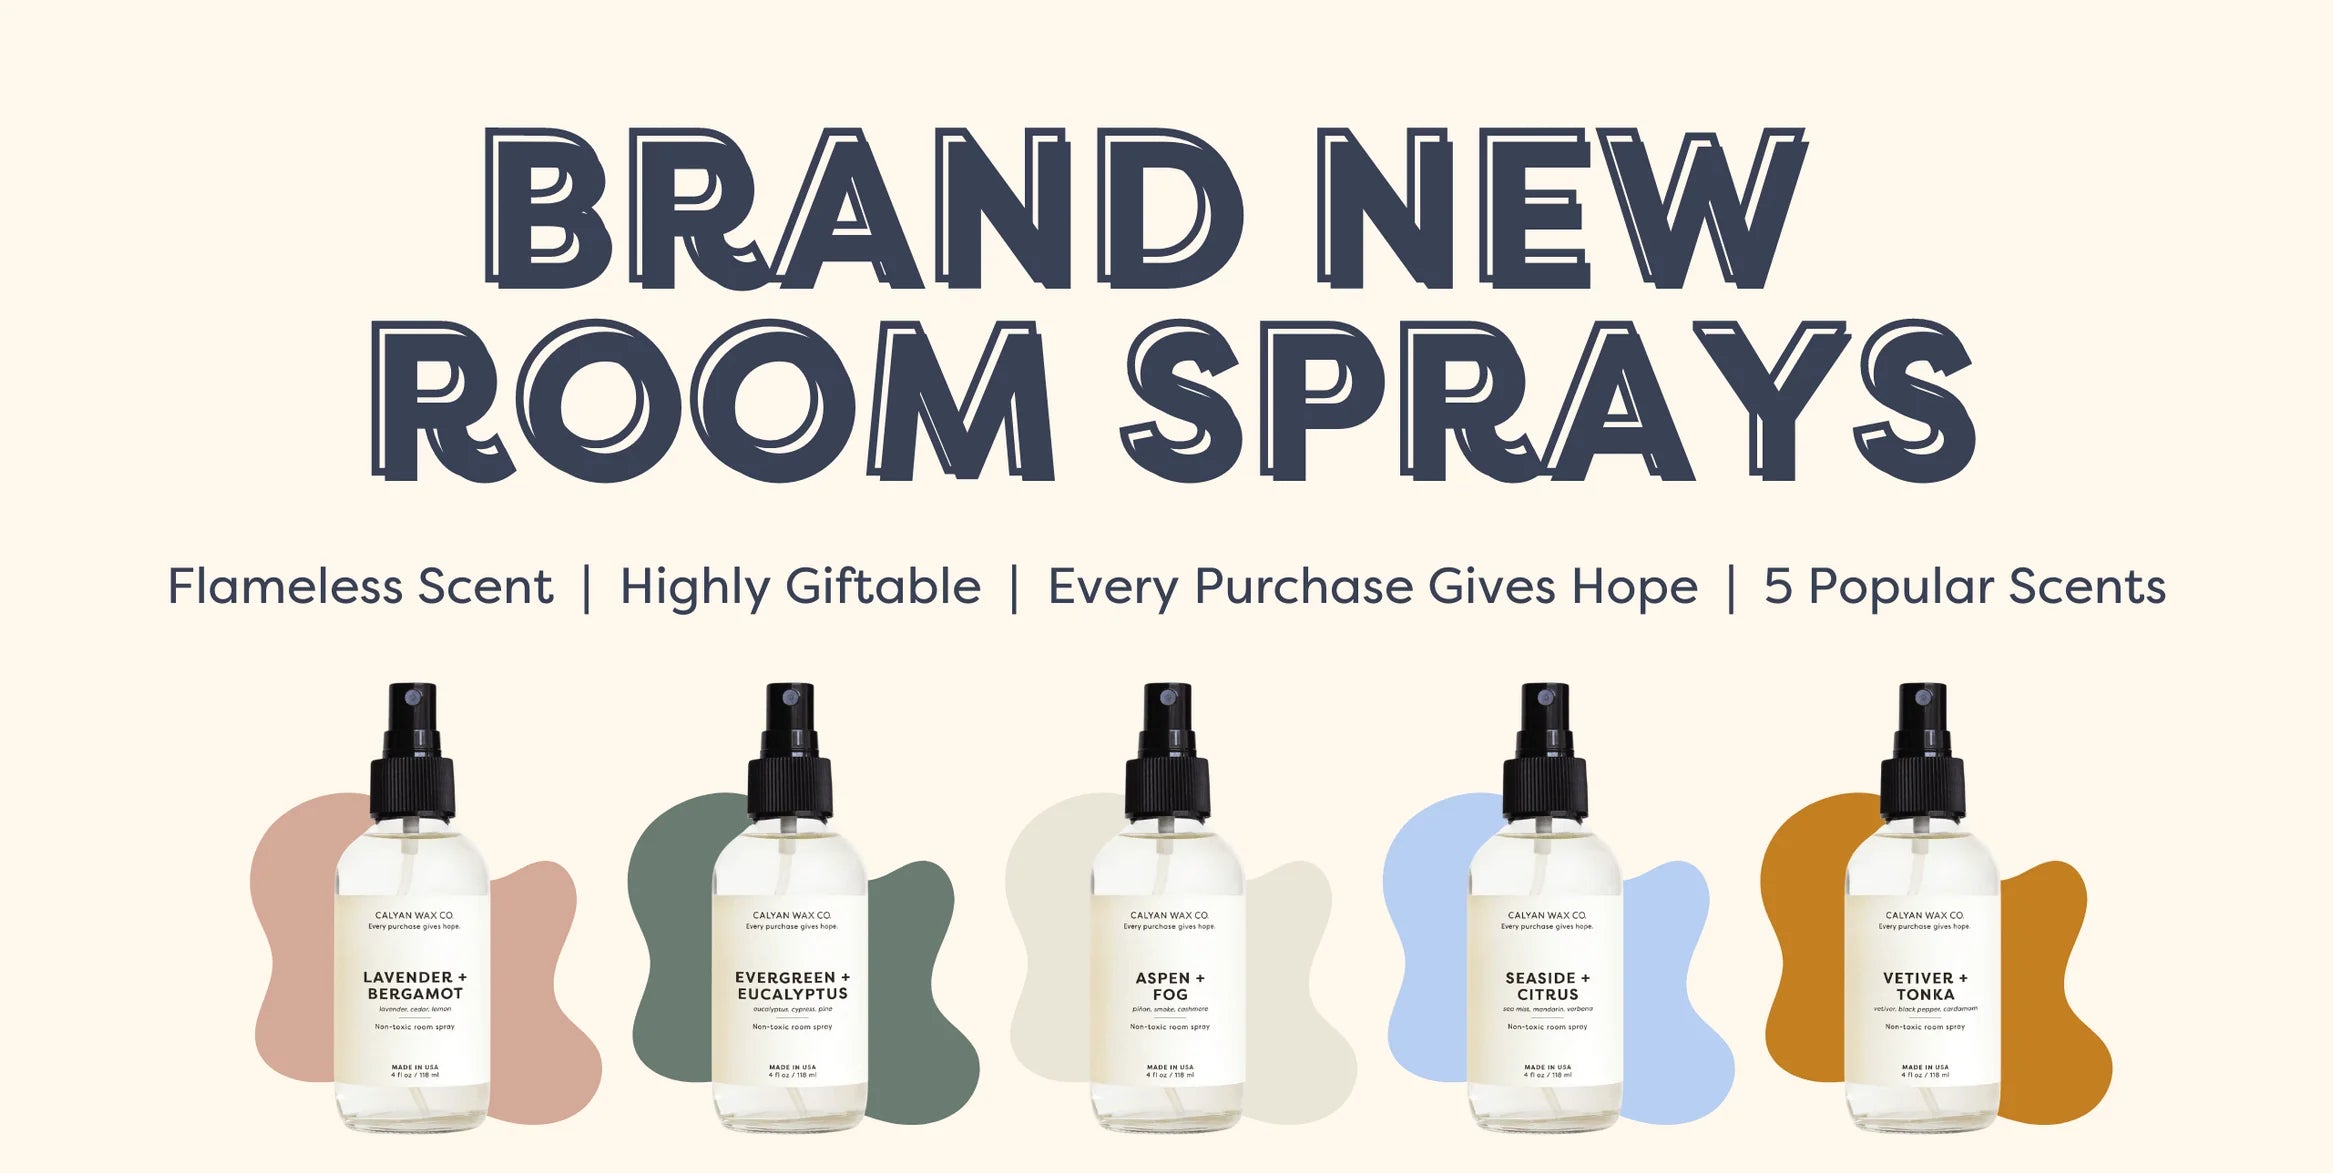 5 brand new rooms sprays from Calyan Wax Co.  